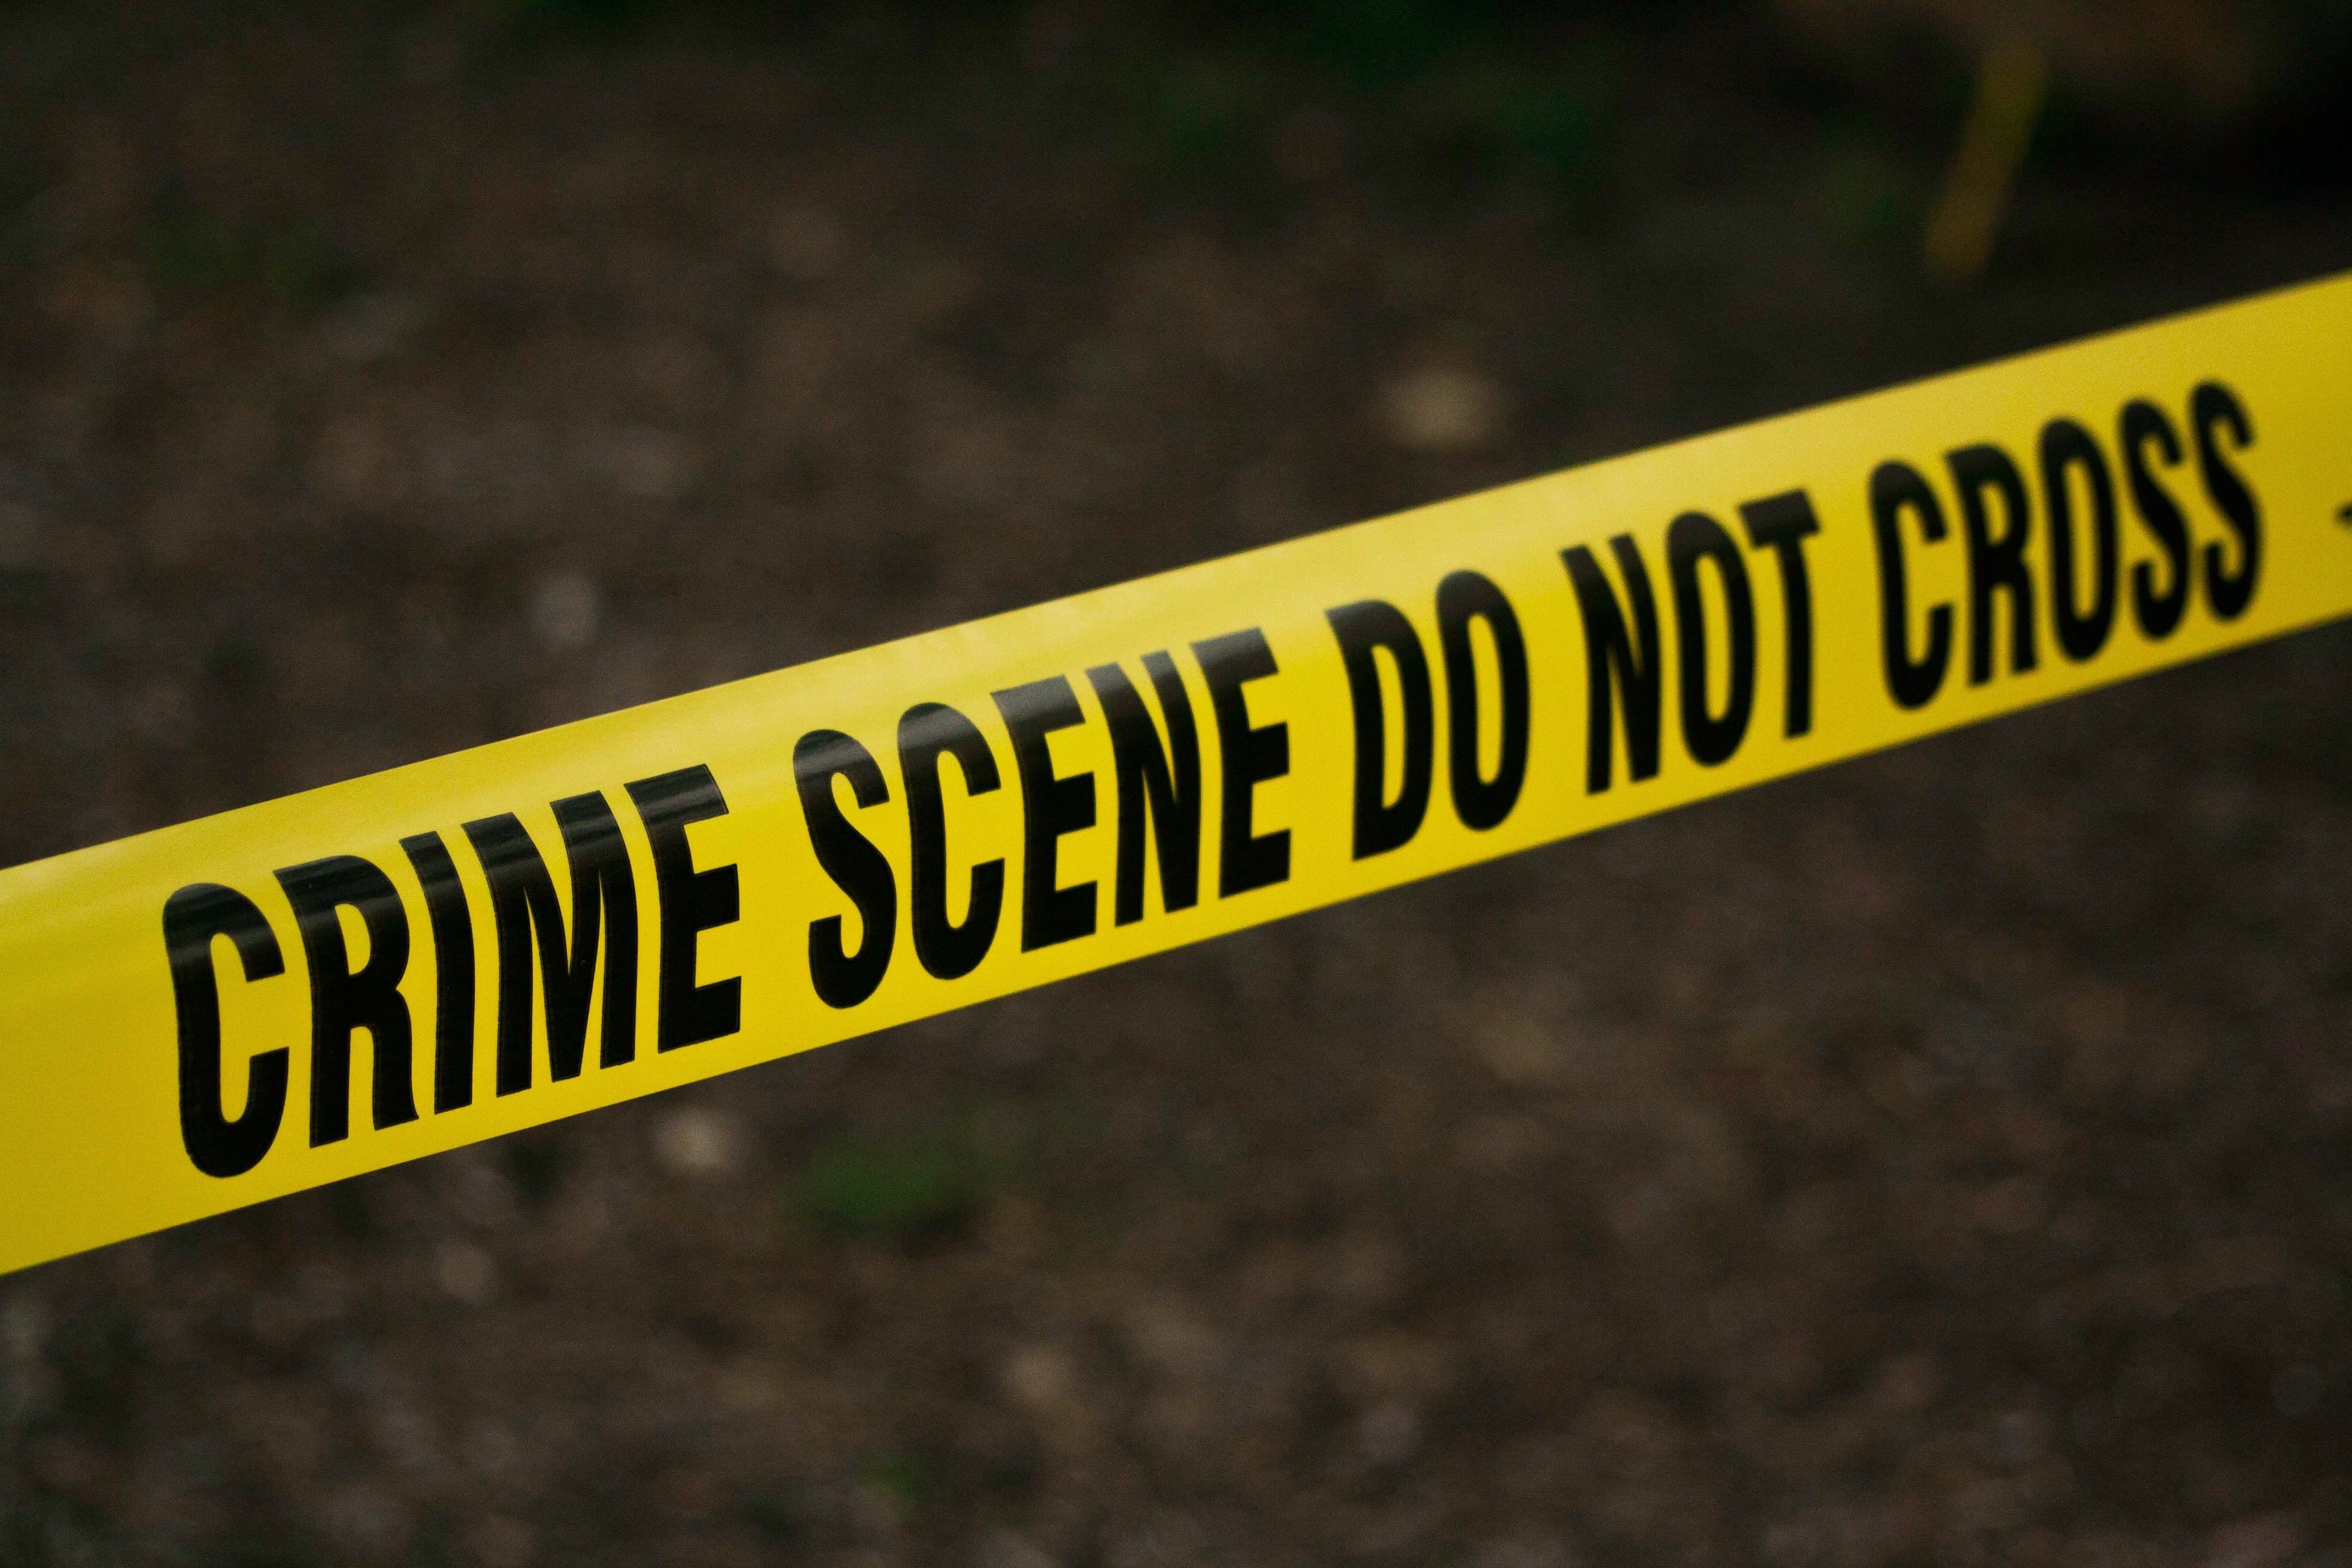 Pictured - A photo of a crime scene do not cross signage | Source: Pexels 